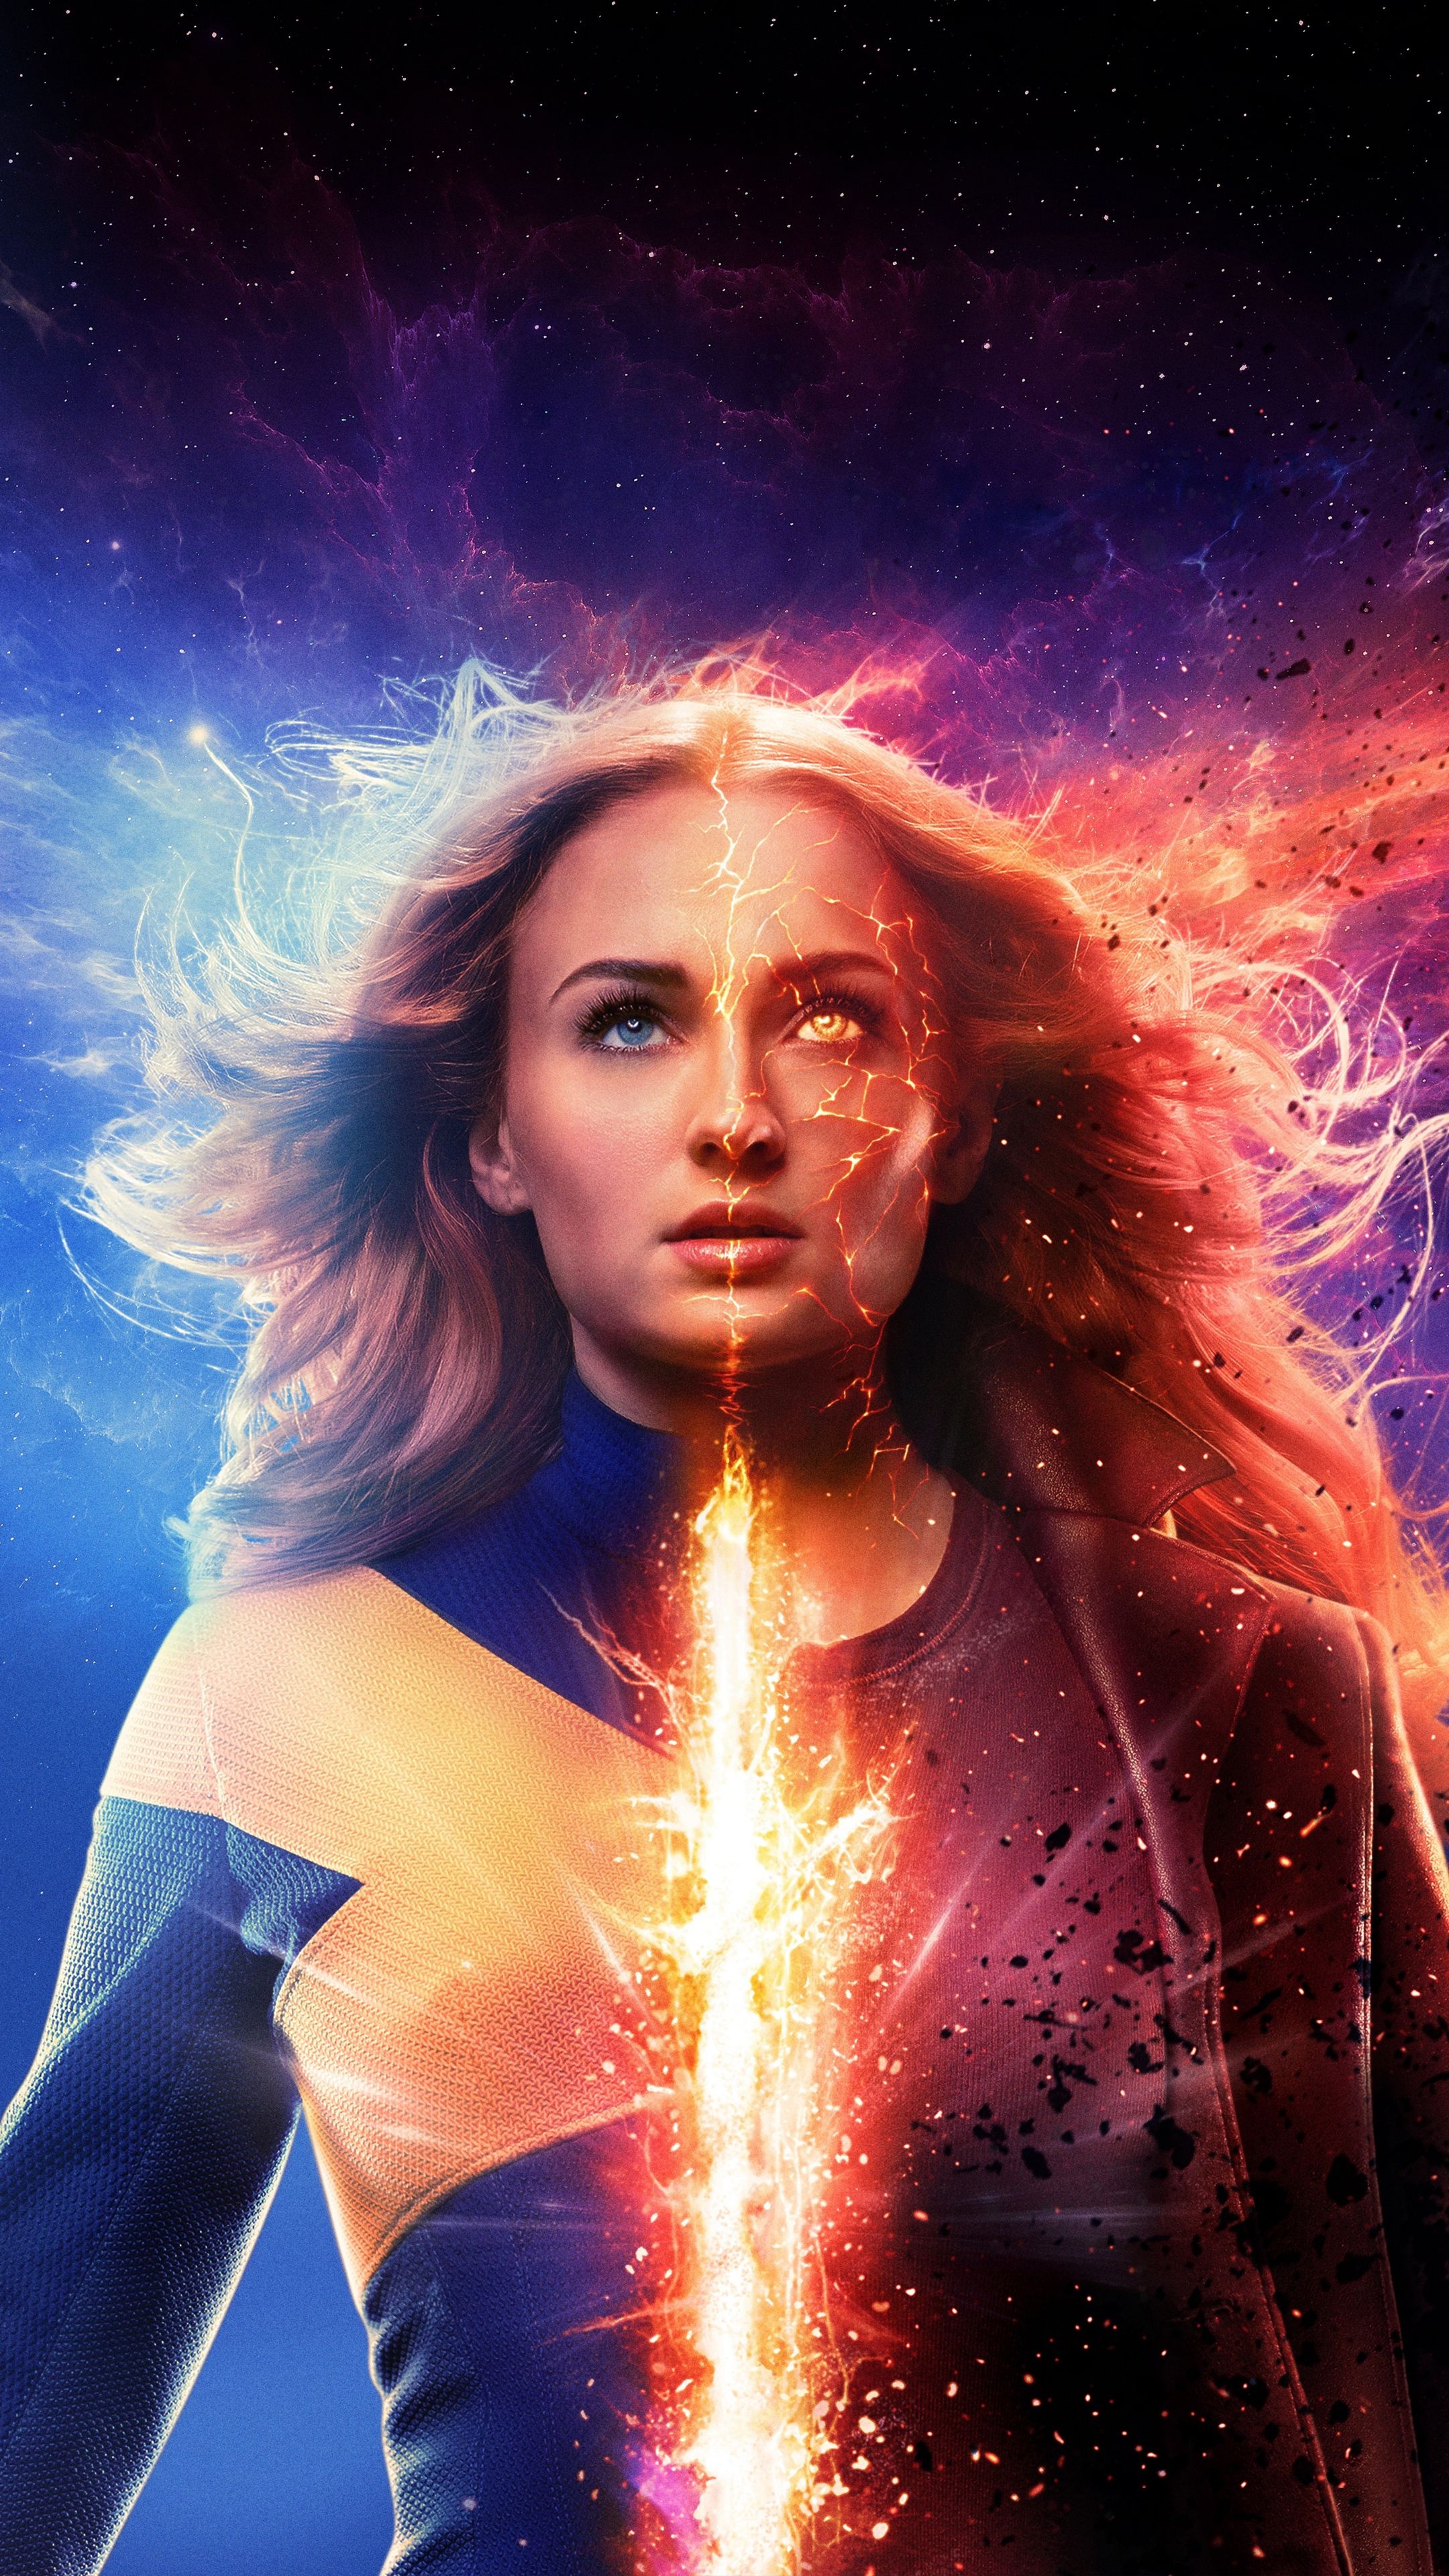 Sophie Turner: Portrayed a young Jean Grey in the X-Men film series (2016–2019). 2160x3840 4K Background.